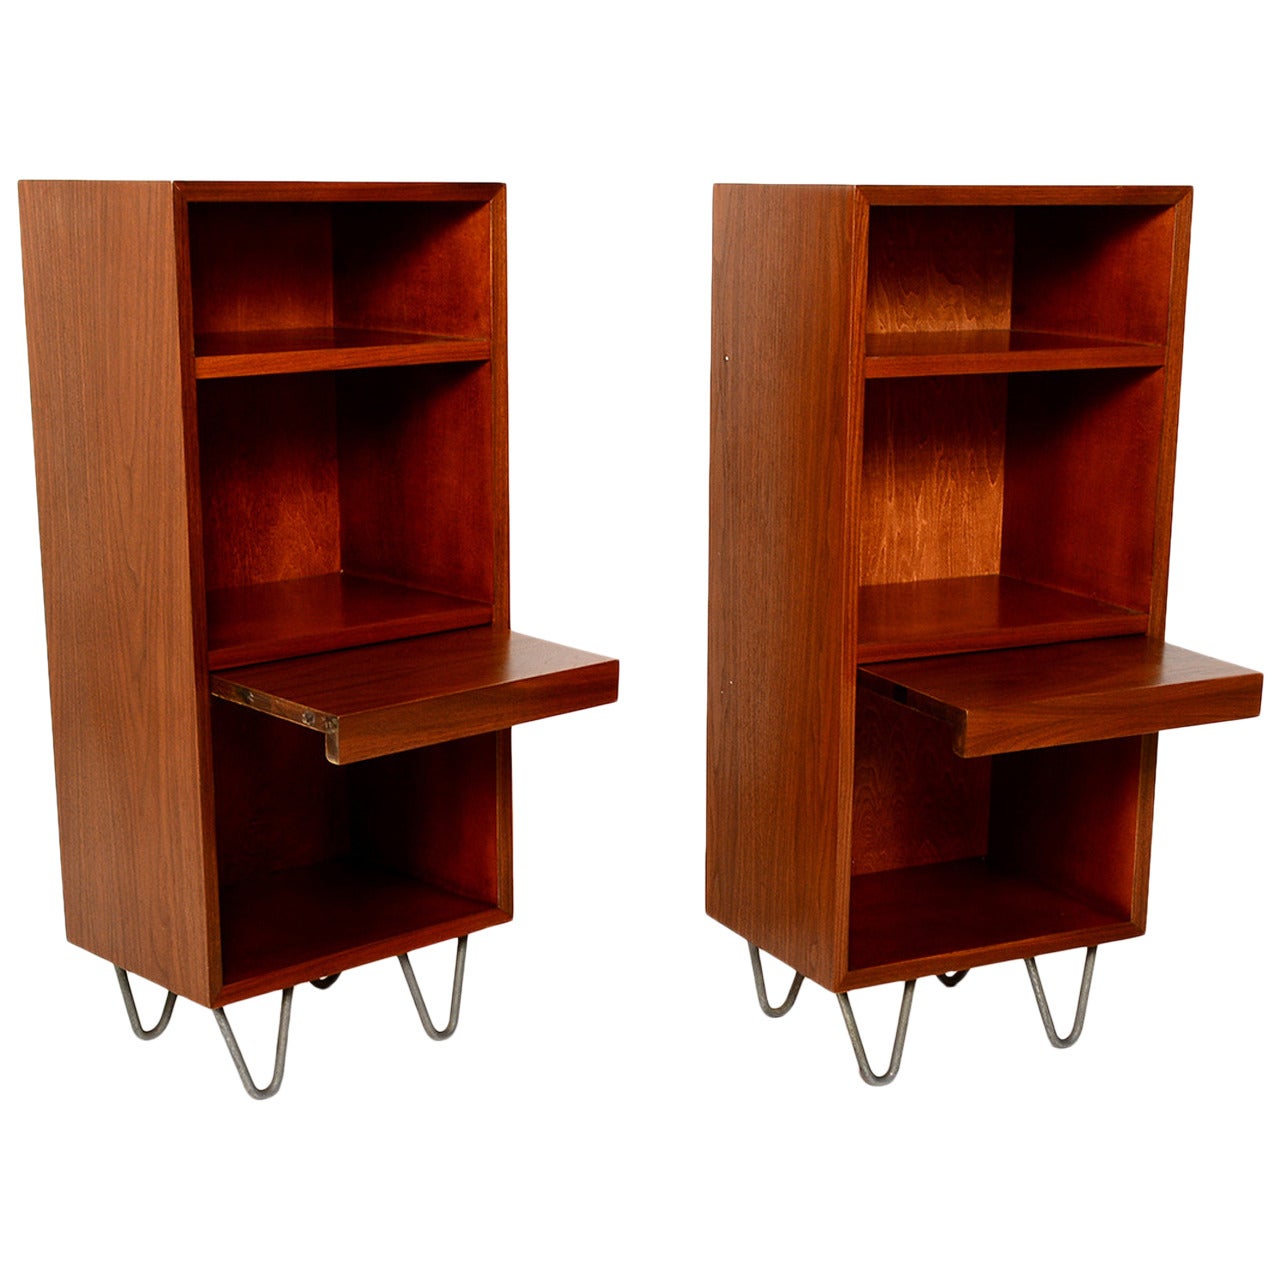 Pair of George Nelson Tall Nightstands for Herman Miller with Hairpin Legs